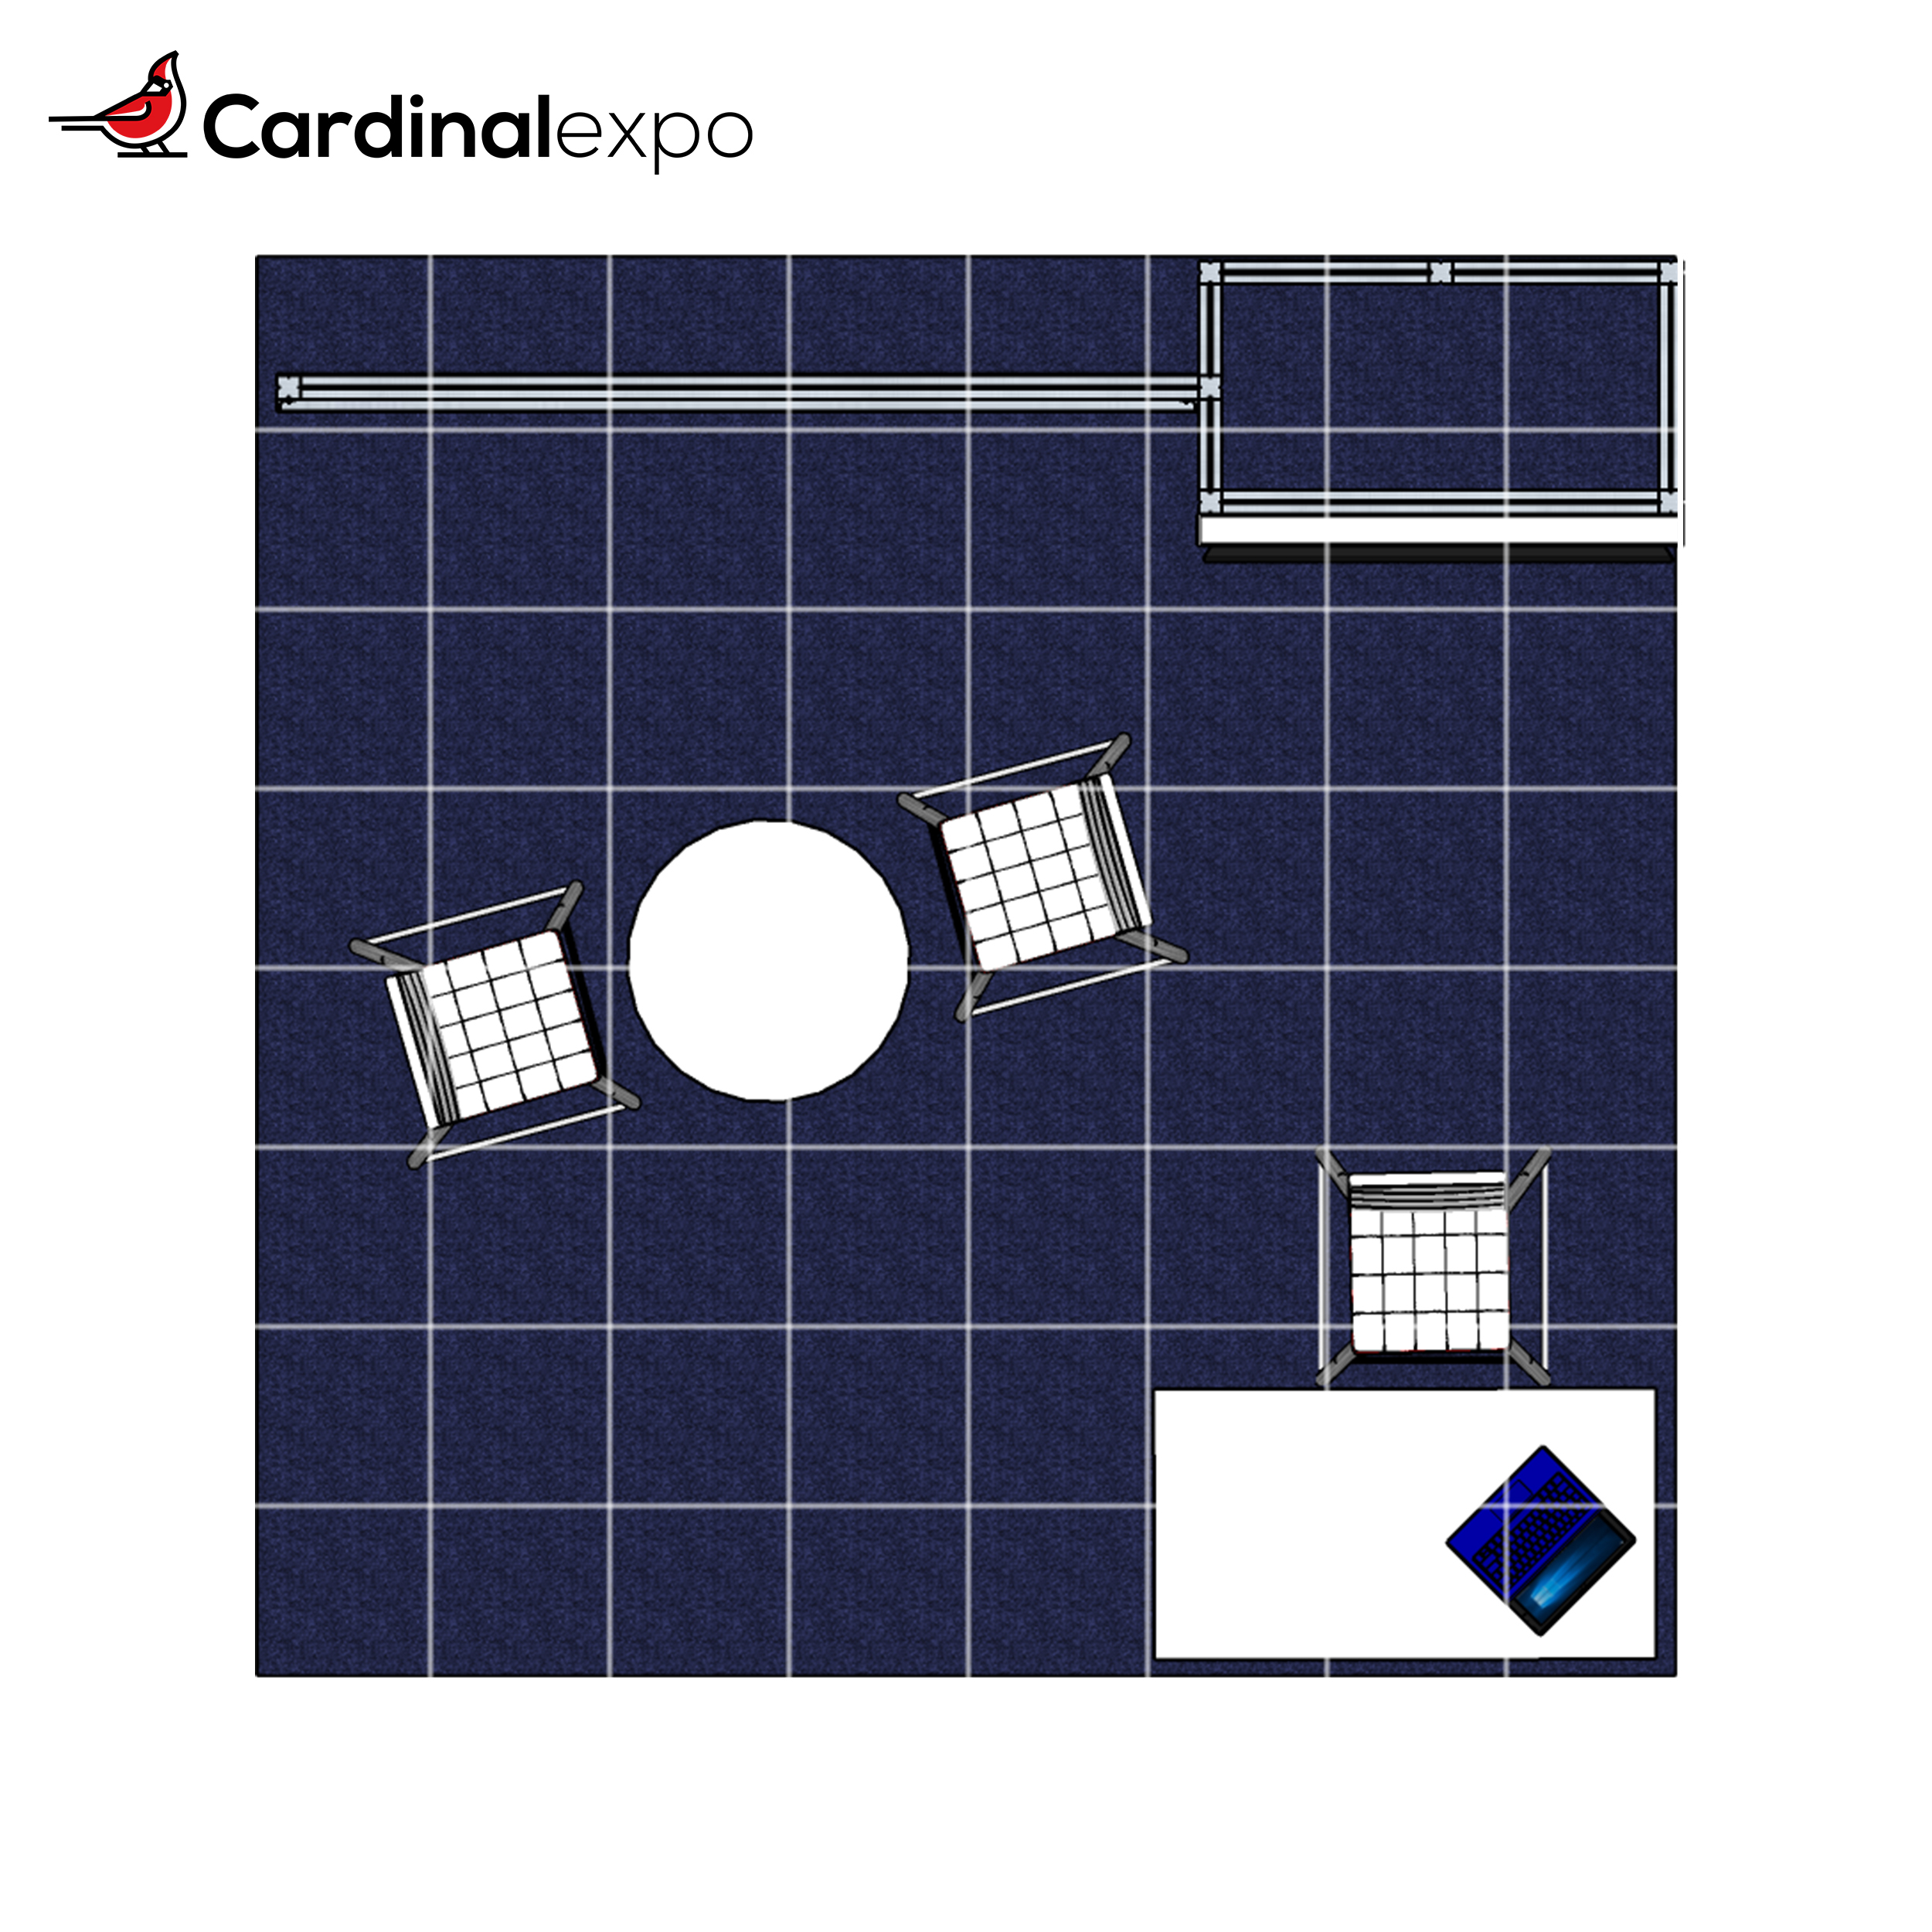 Top-down view of 10 foot by 10 foot booth rental with floorplan overlay.